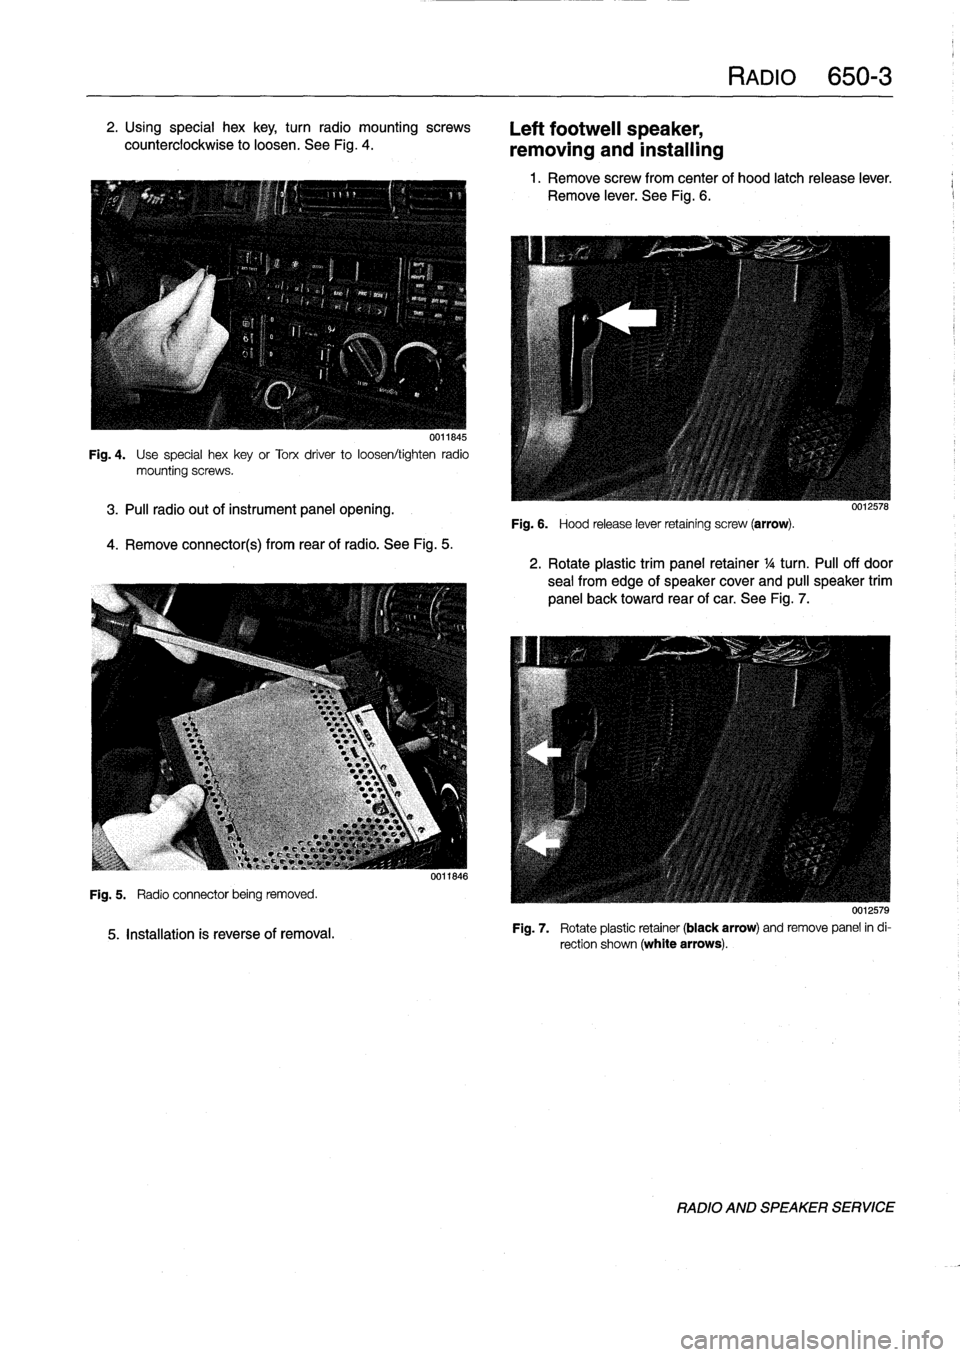 BMW 328i 1995 E36 User Guide 2
.
Using
special
hex
key,
turn
radio
mountingscrews

counterclockwise
to
loosen
.
See
Fig
.
4
.

0011845

Fig
.
4
.

	

Use
special
hexkey
or
Torx
driver
to
loosen/tighten
radio
mountingscrews
.

3
.